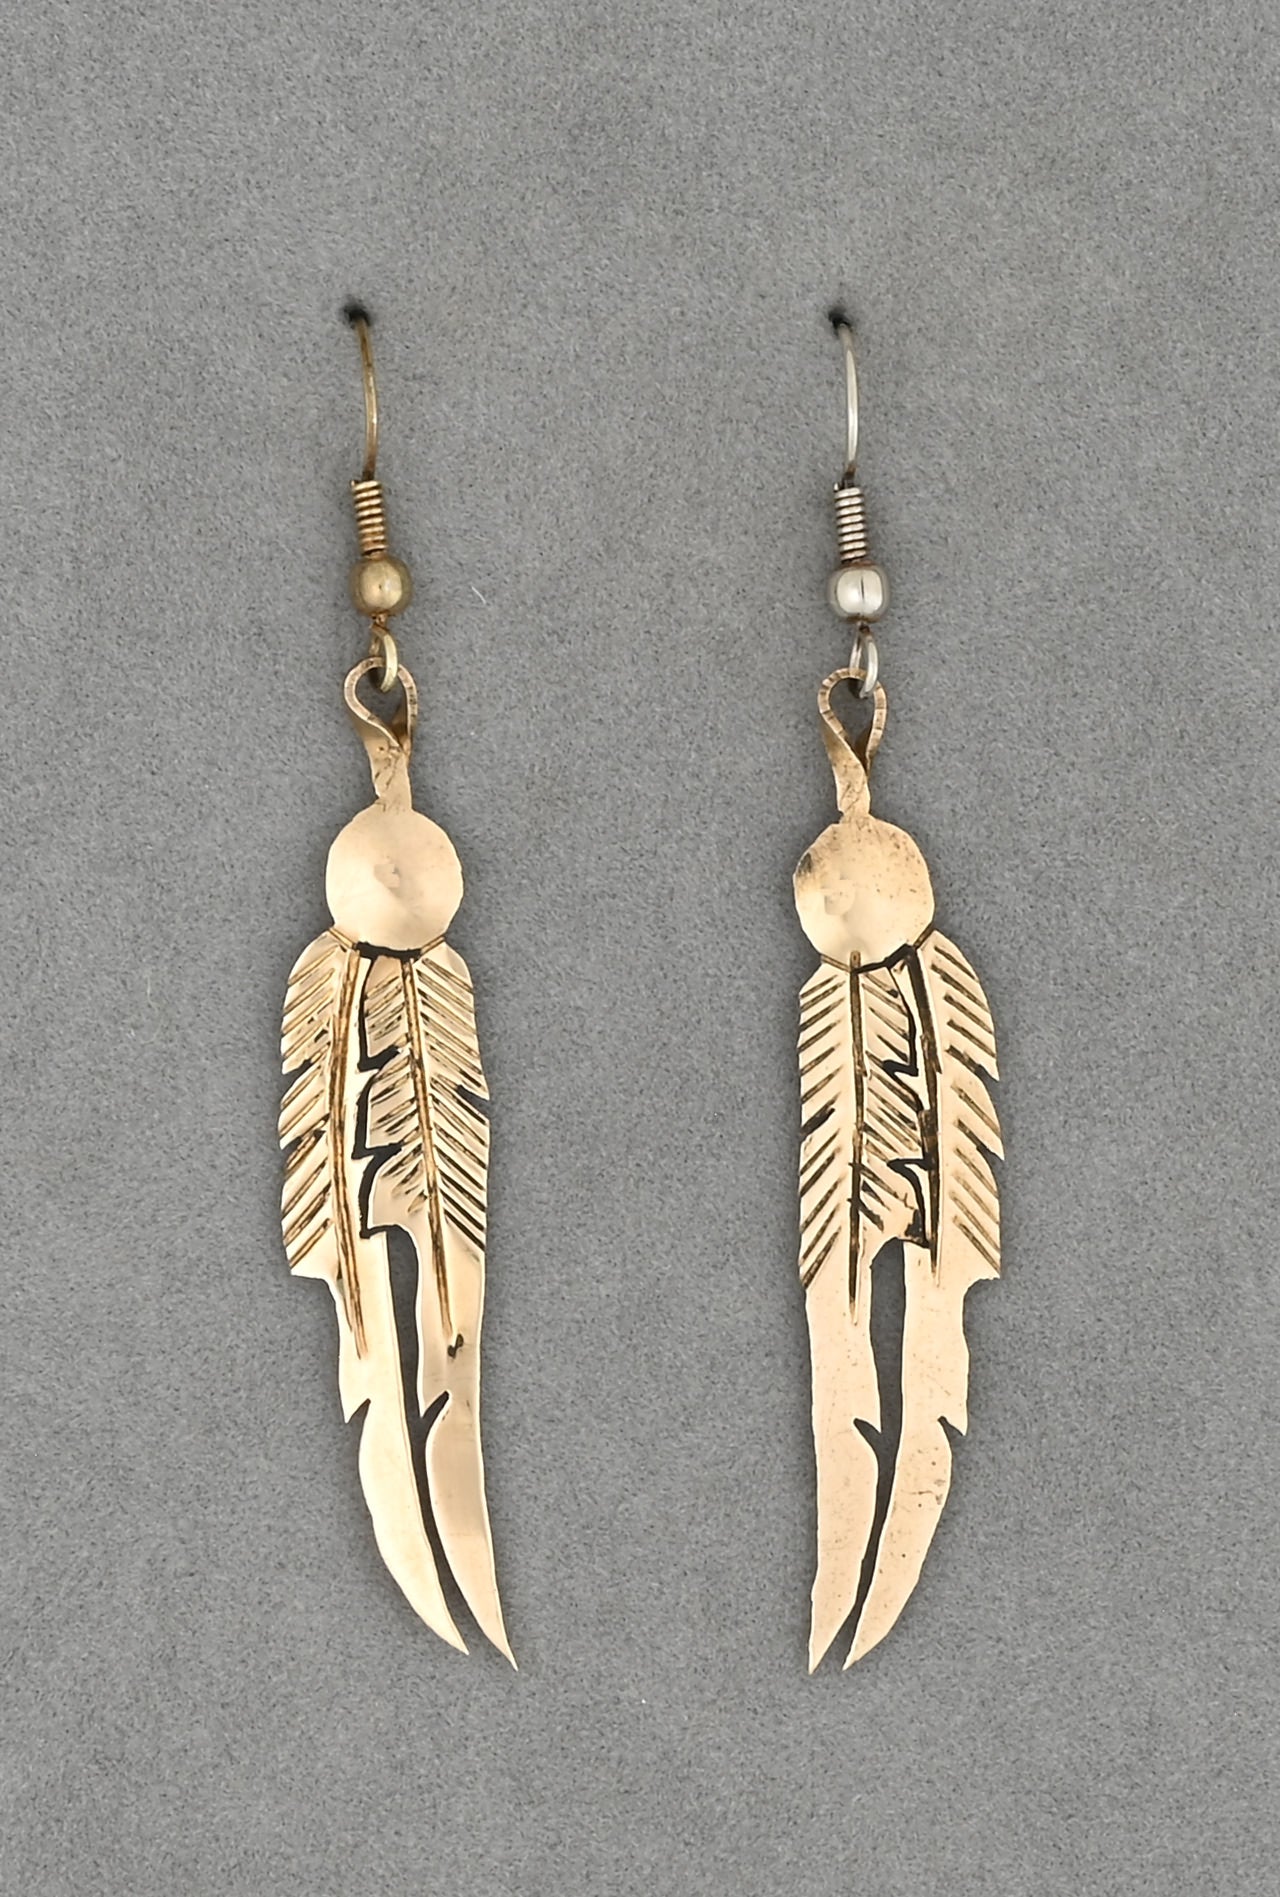 Brass Feather Earrings by David Haskell